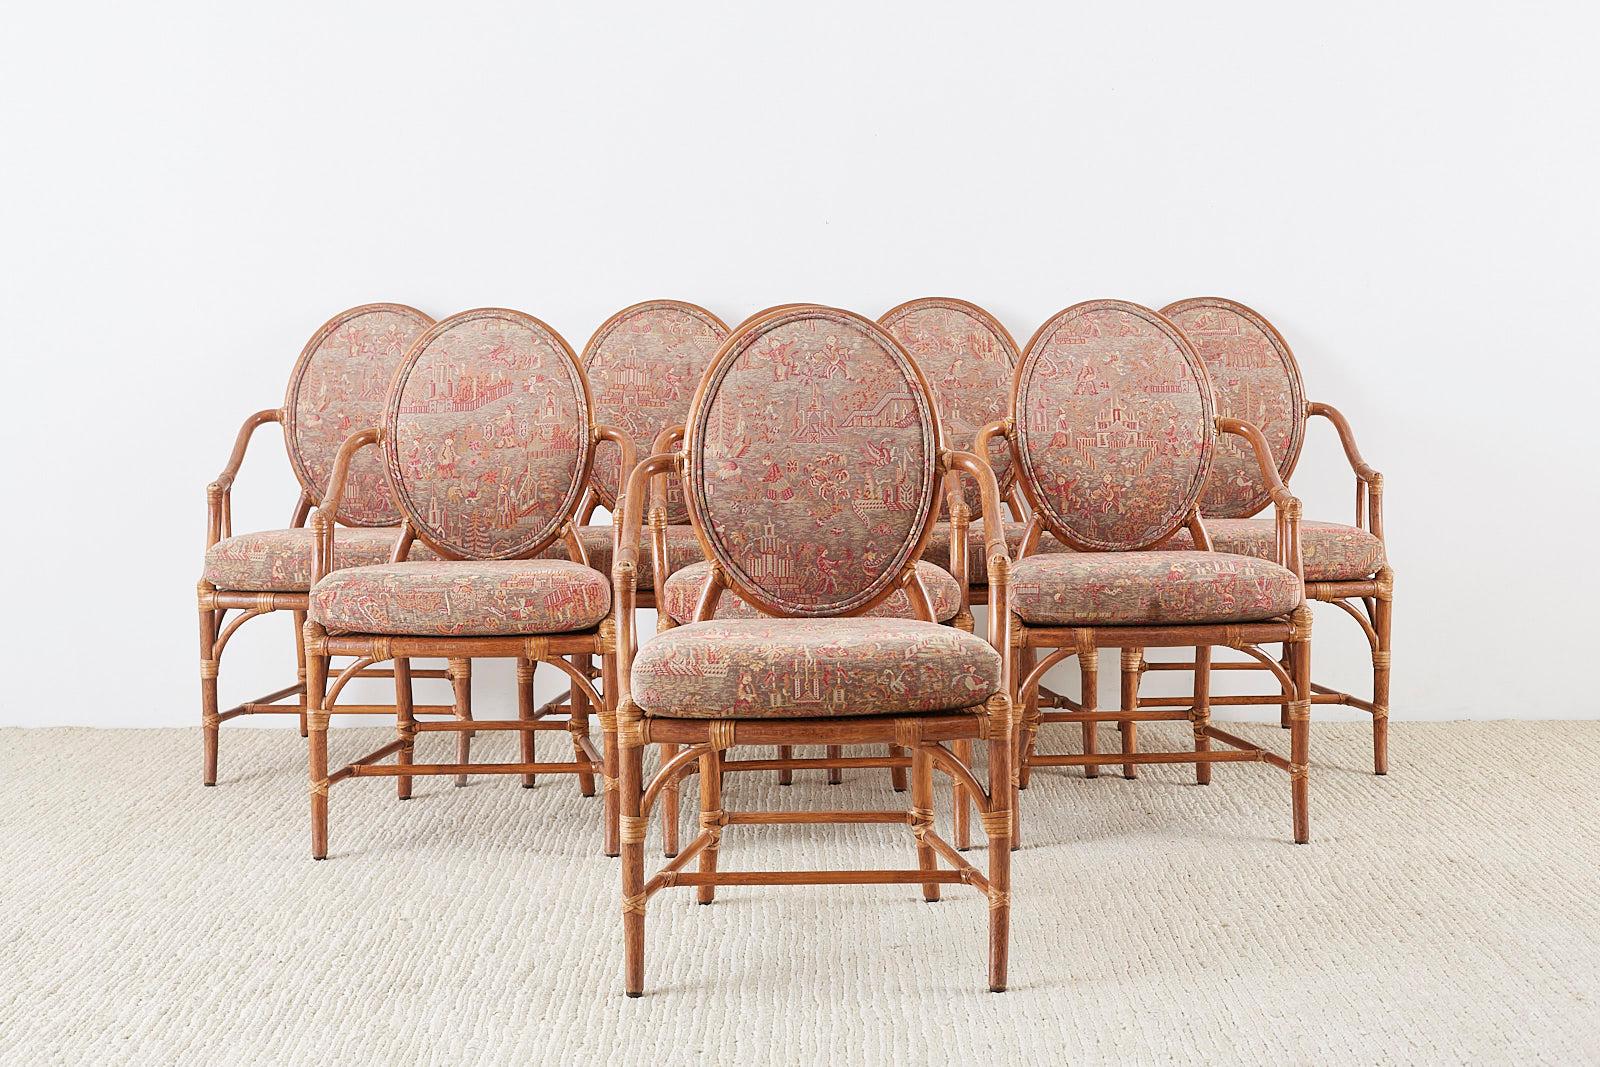 Fantastic set of eight organic modern dining armchairs made by McGuire. Constructed from bamboo rattan poles featuring caned seats and round backs. Upholstered with a vintage chinoiserie style fabric. The chinoiserie fabric is decorated with